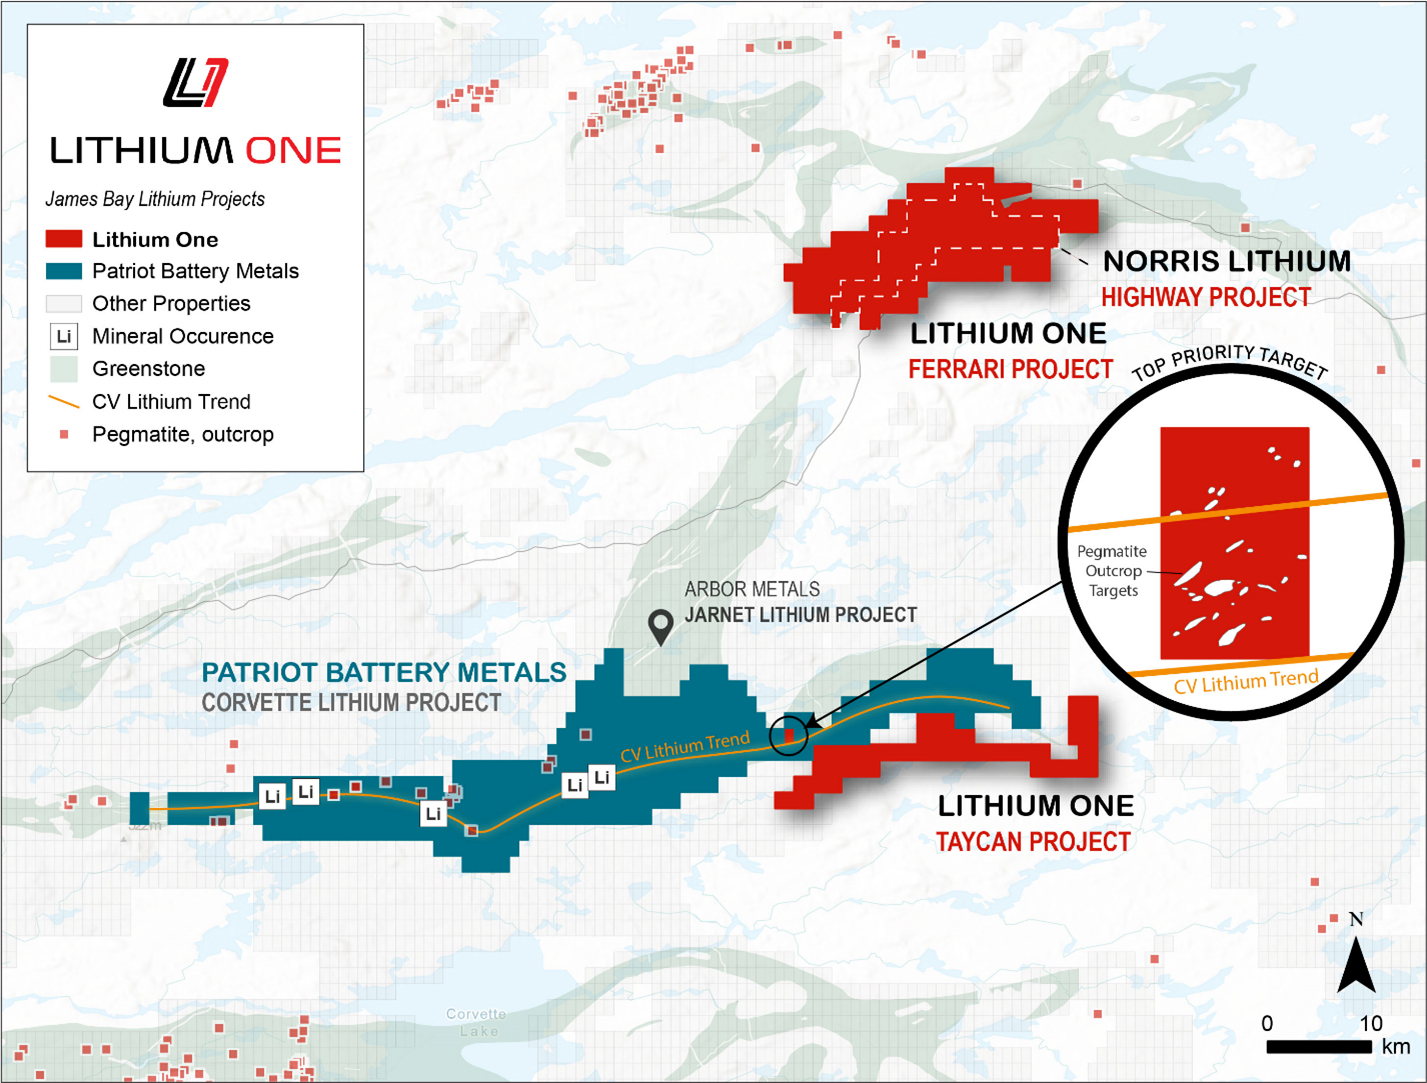 Lithium One’s top priority targets at the Taycan Lithium Project, showing the Ferrari Project, Norris Lithium’s Highway Project and the “CV Lithium Trend” identified by Patriot Battery Metals.